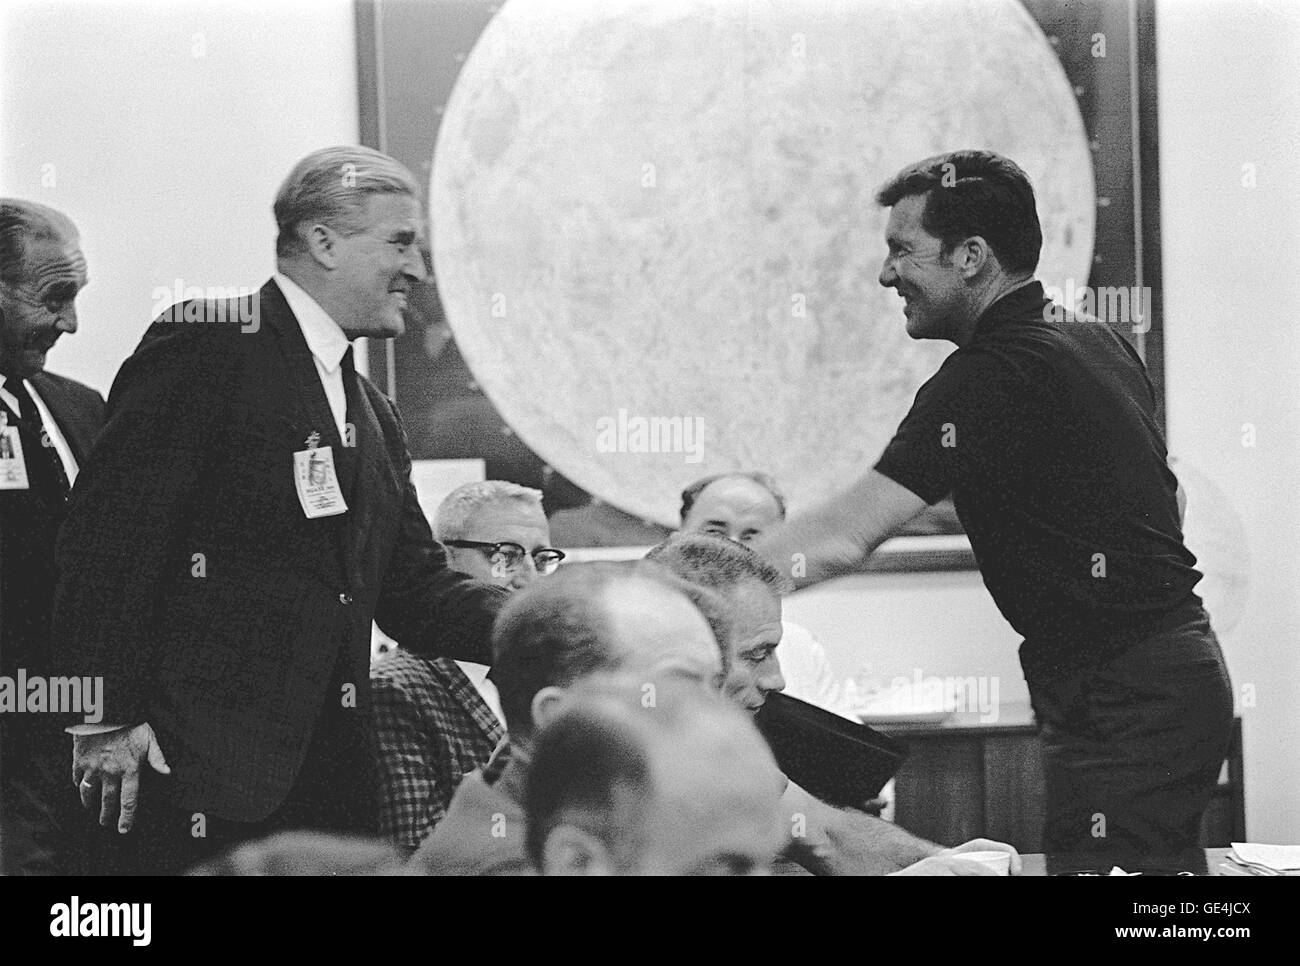 (October 10, 1968) Apollo 7 Commander Walter M. Schirra, Jr., left, greets Dr. Wernher Von Braun, Director, Marshall Space Flight Center and Dr. Kurt Debus, Right, KSC Director, during a prelaunch mission briefing held at the Florida Spaceport.  Image # : 68P-0405 Stock Photo